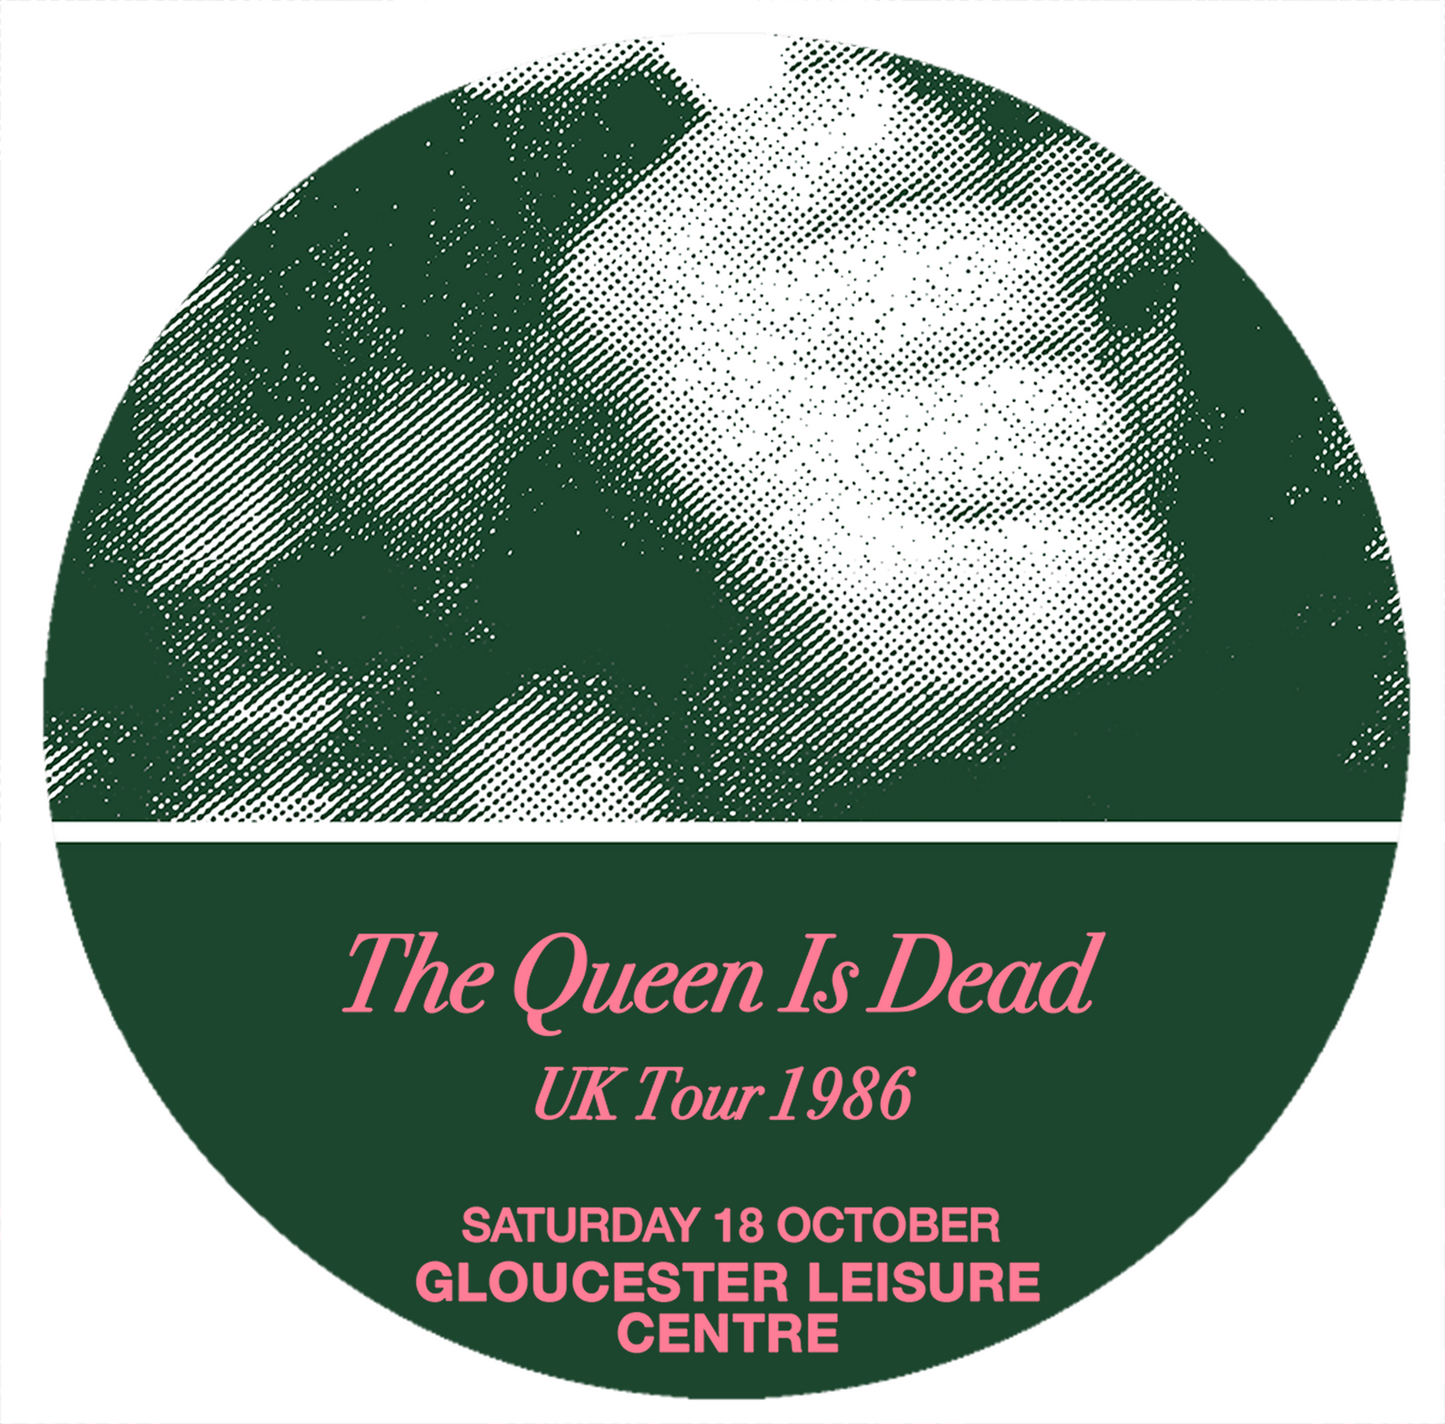 THE SMITHS - The Queen Is Dead - UK Tour - 1986 - Beach Towel